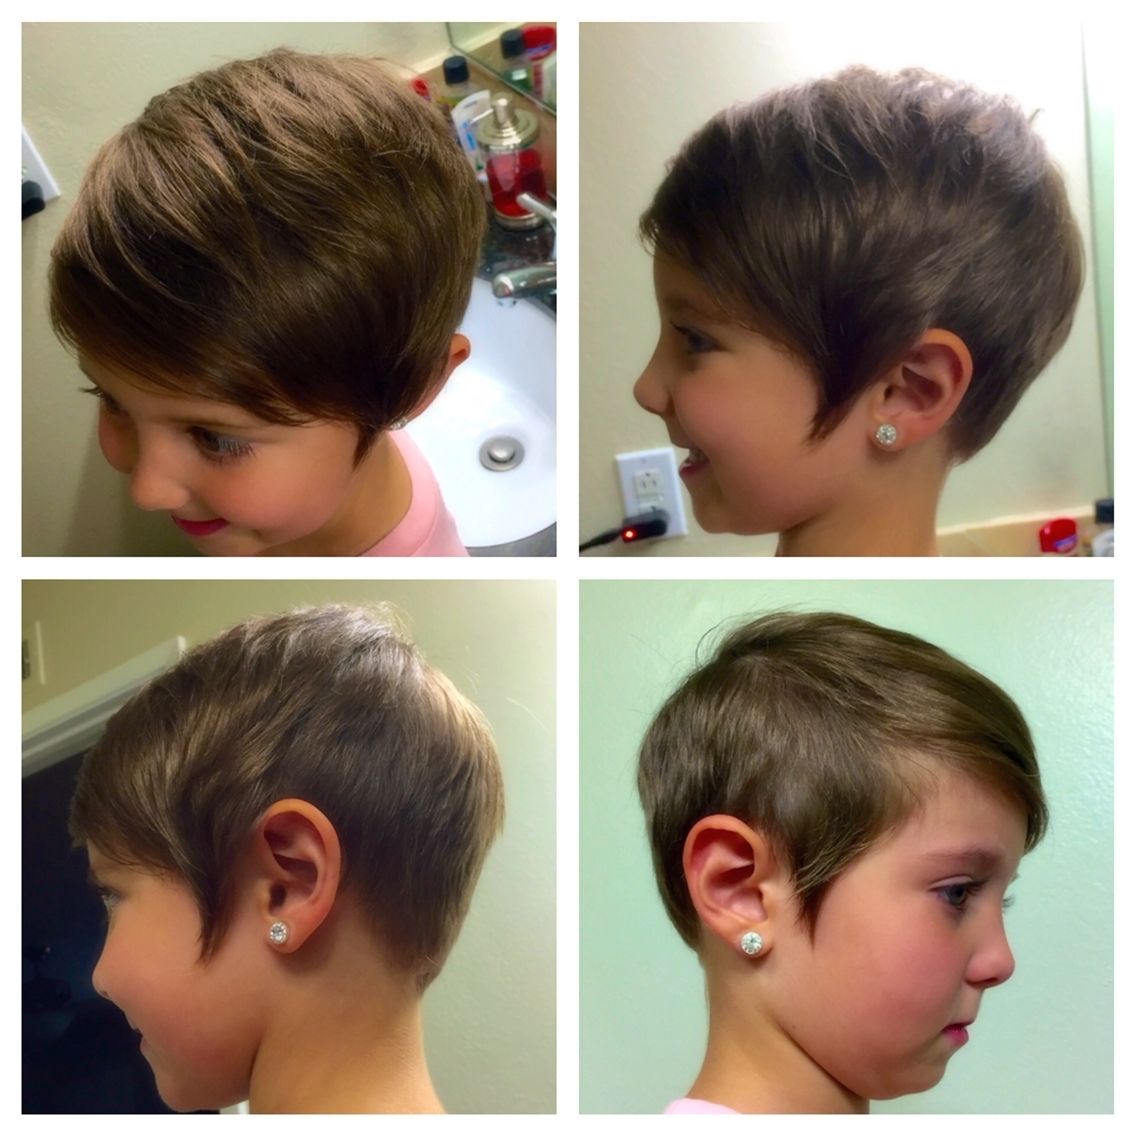 Kids Toddler Short Pixie Haircut. Girls Asymmetrical Hair Cut Regarding Most Up To Date Short Pixie Hairstyles For Little Girls (Photo 2 of 15)